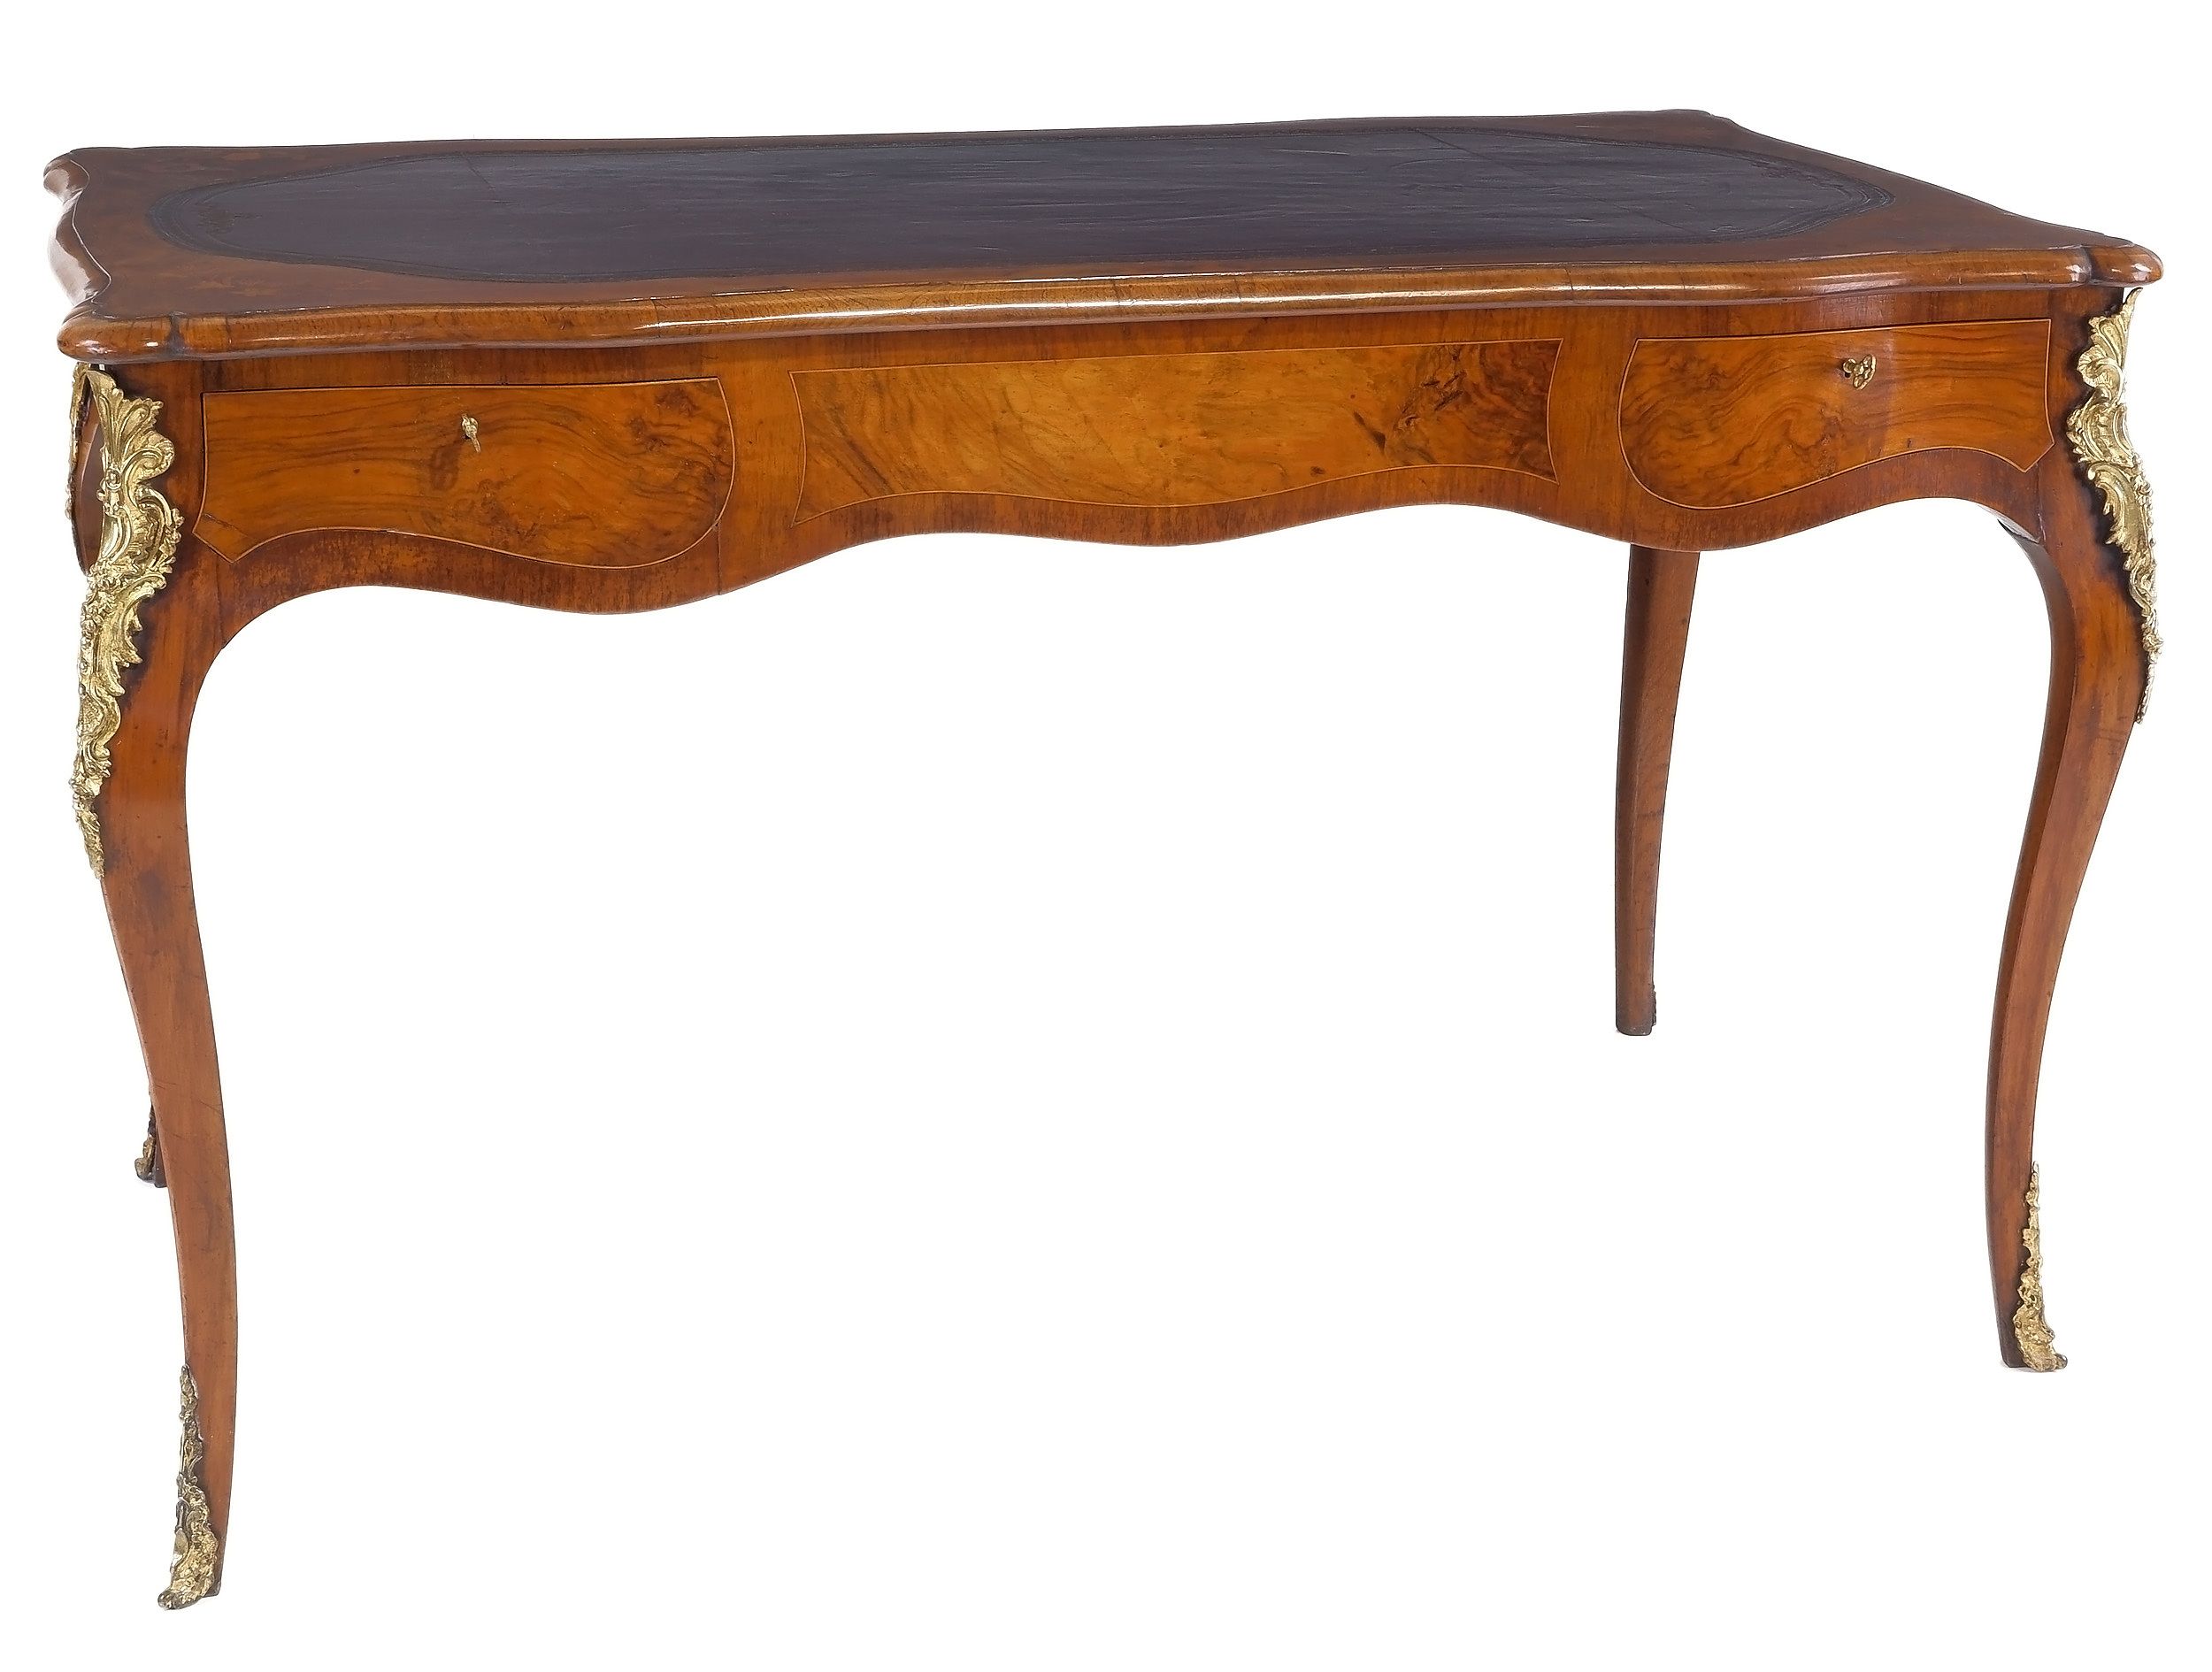 'Louis XV Style Inlaid Walnut and Ormolu Mounted Writing Table, Late 19th Century'